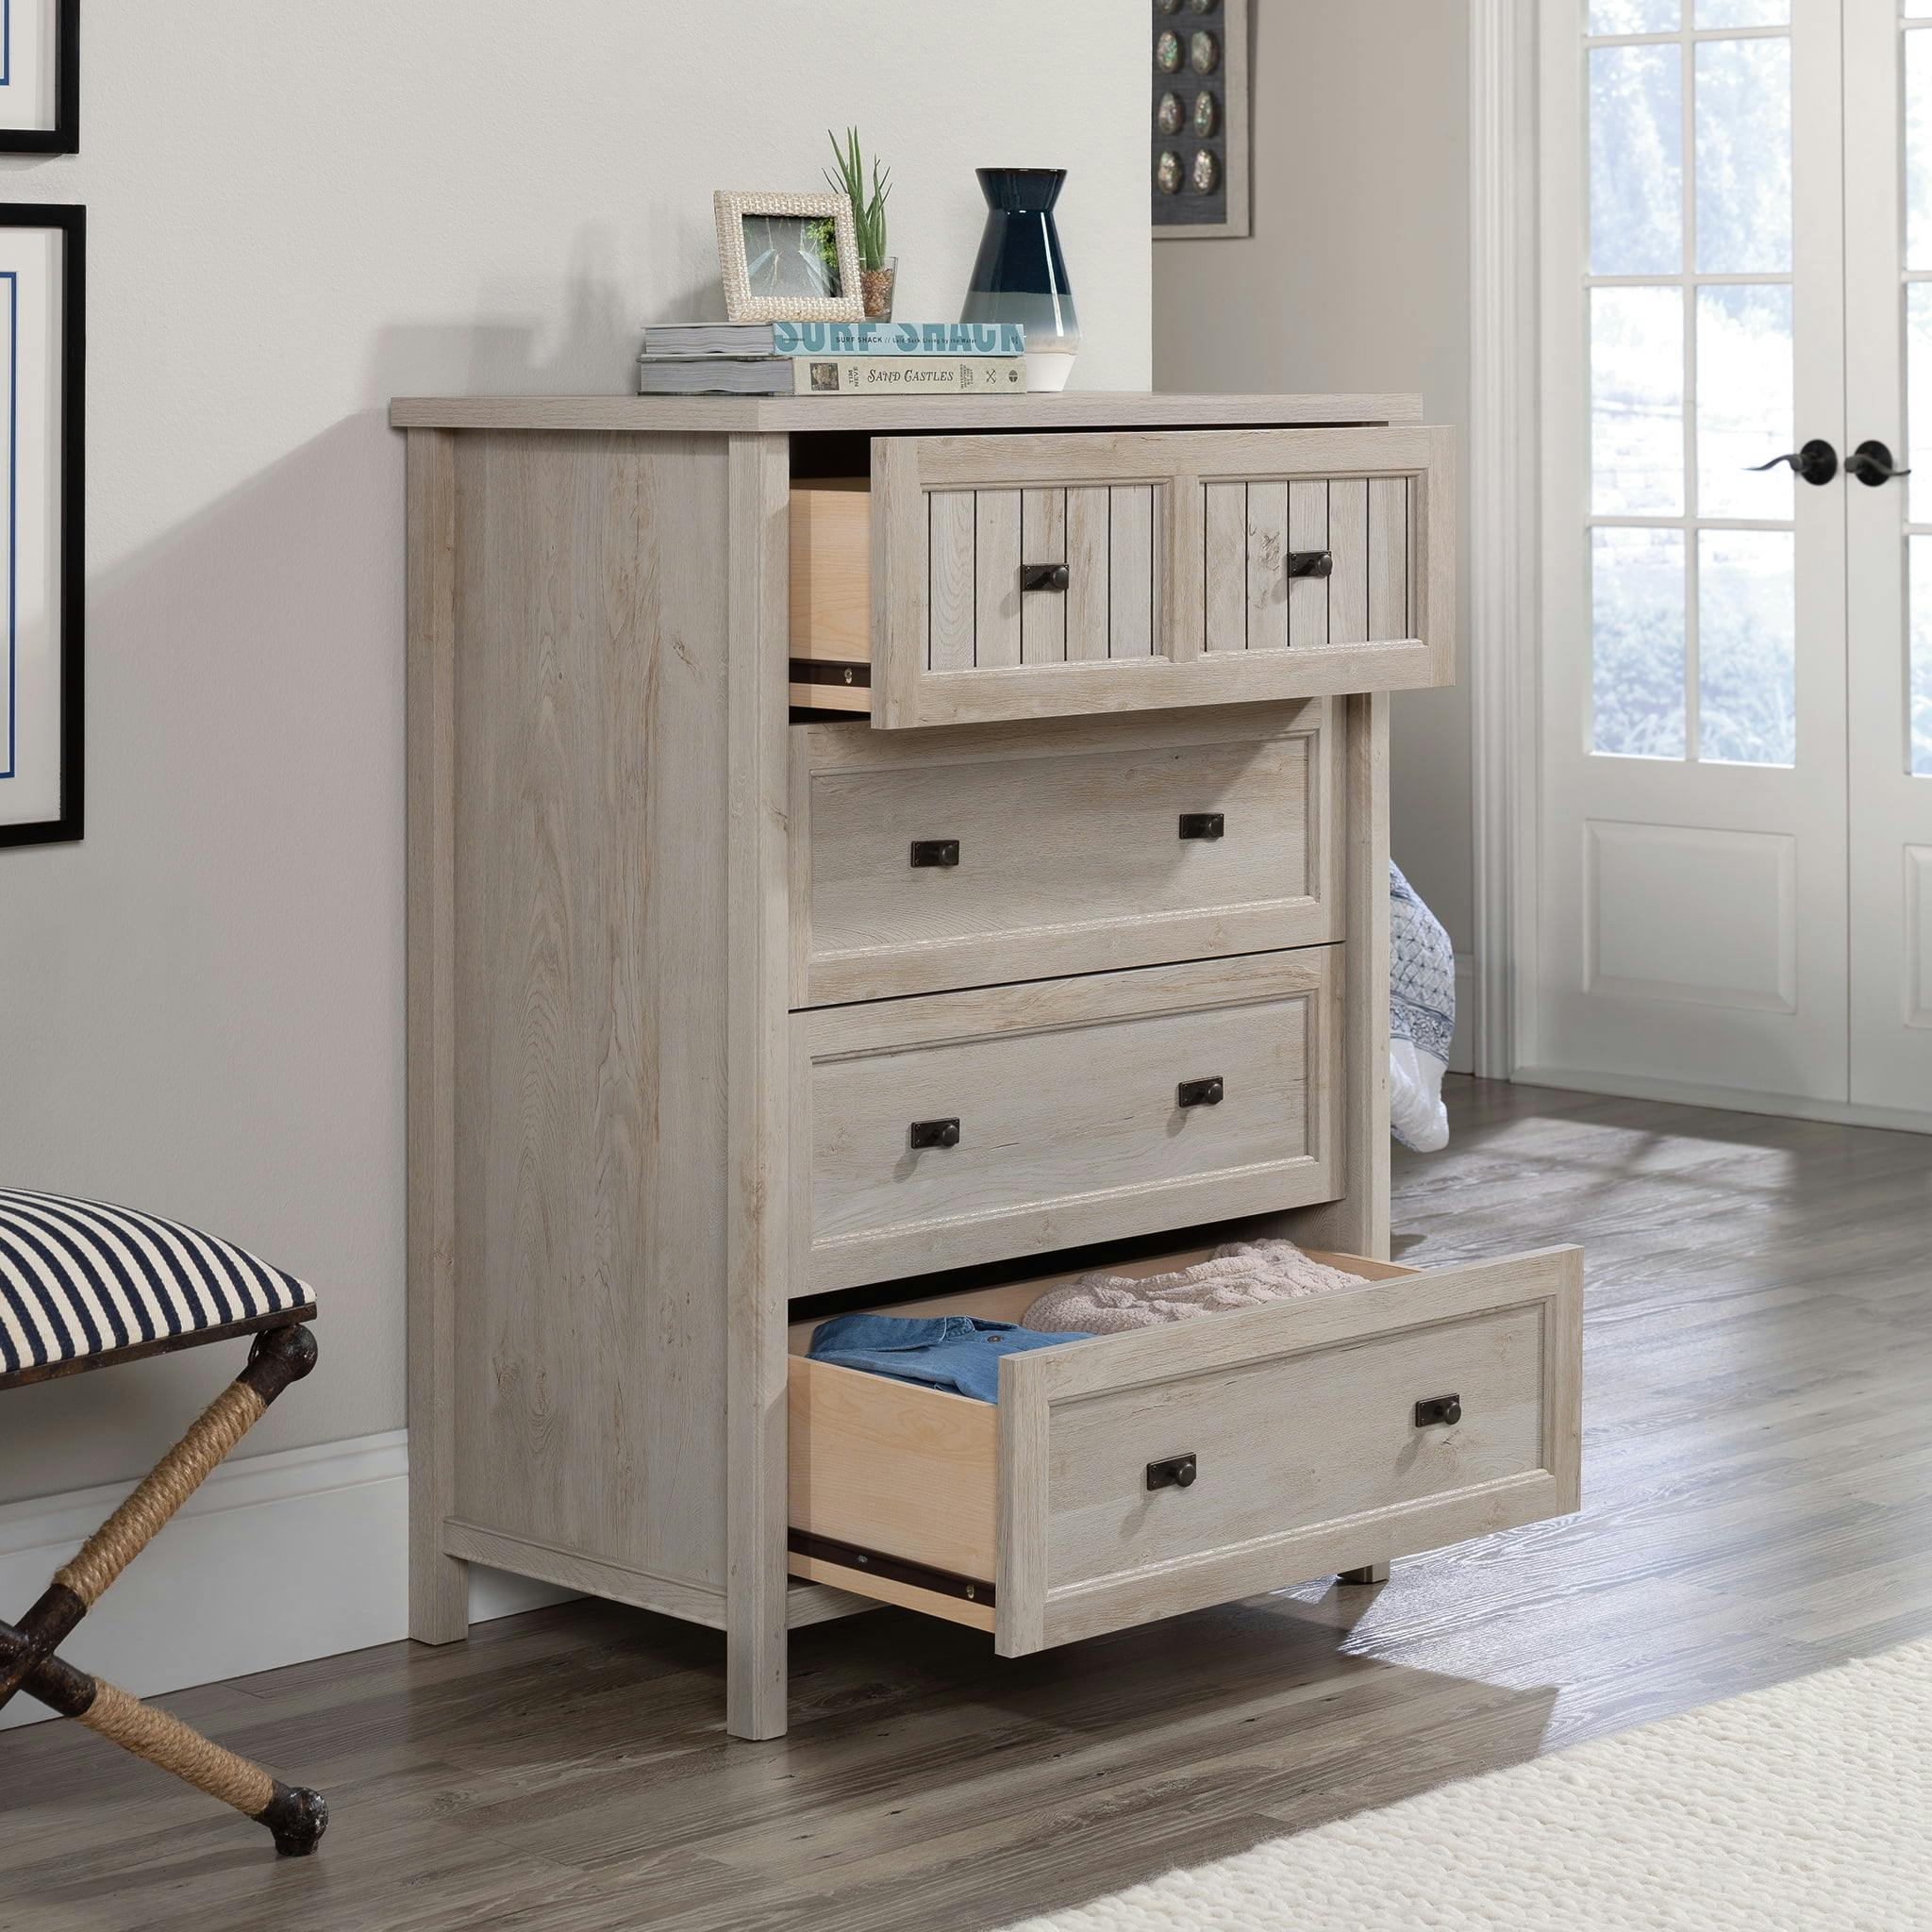 Chalked Chestnut 4-Drawer Spacious Dresser with Slat-Front Detail